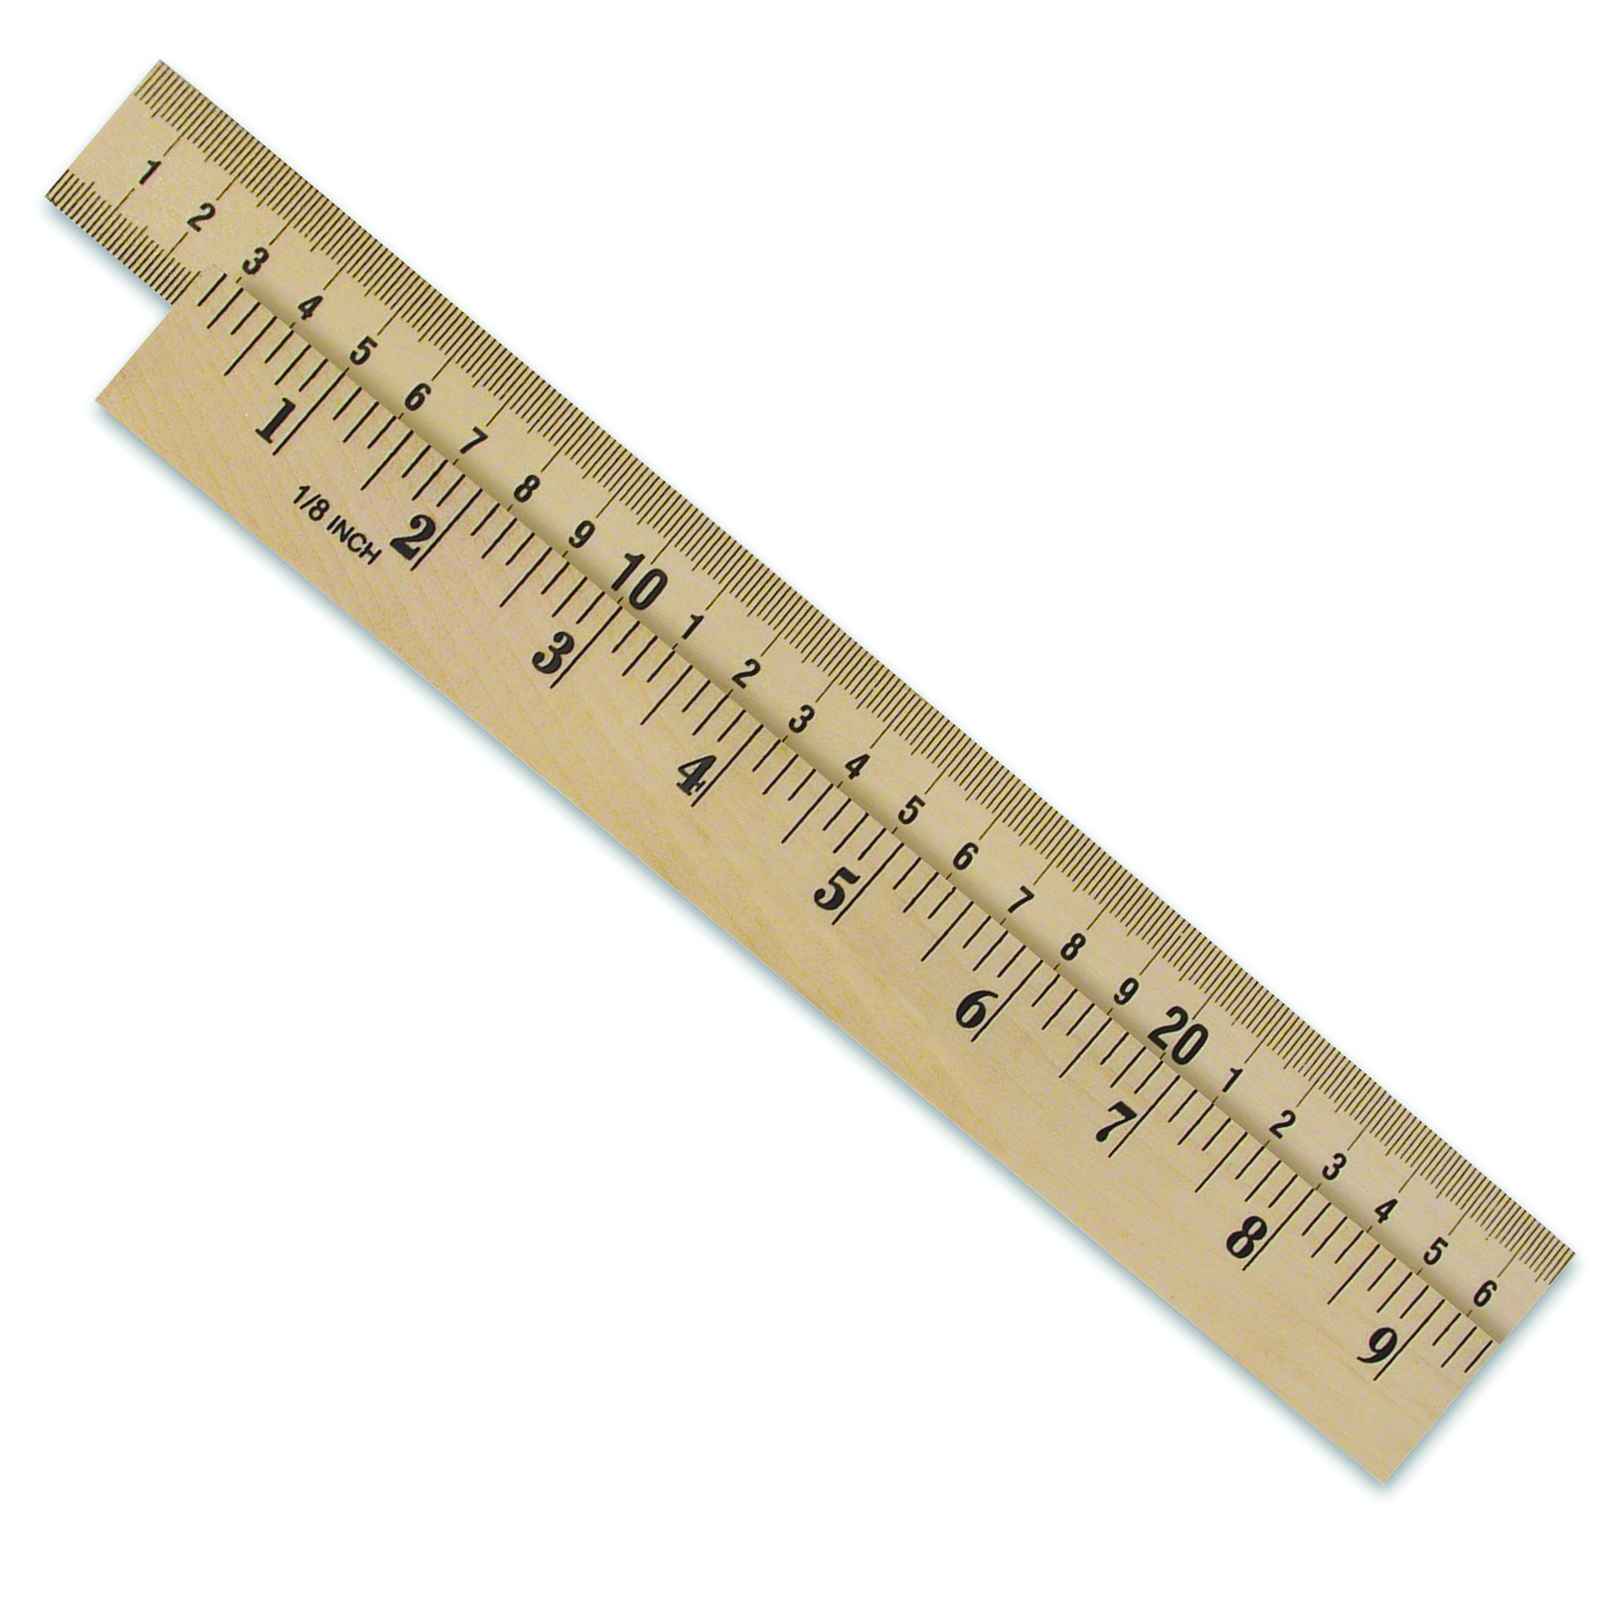 Wooden Meter Stick, Pack of 4